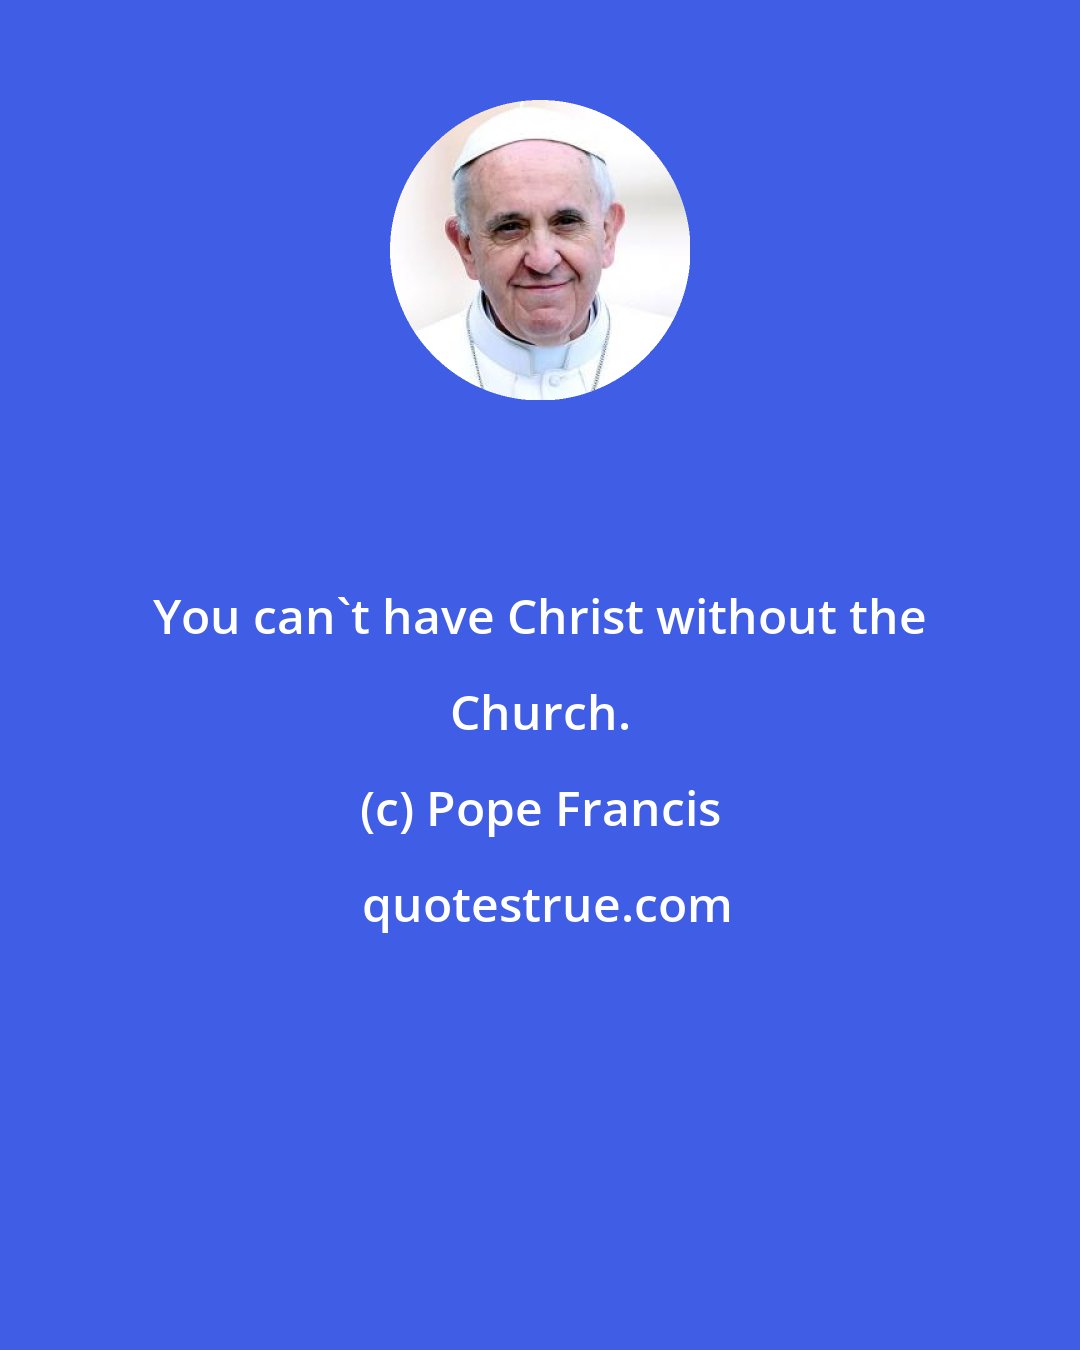 Pope Francis: You can't have Christ without the Church.